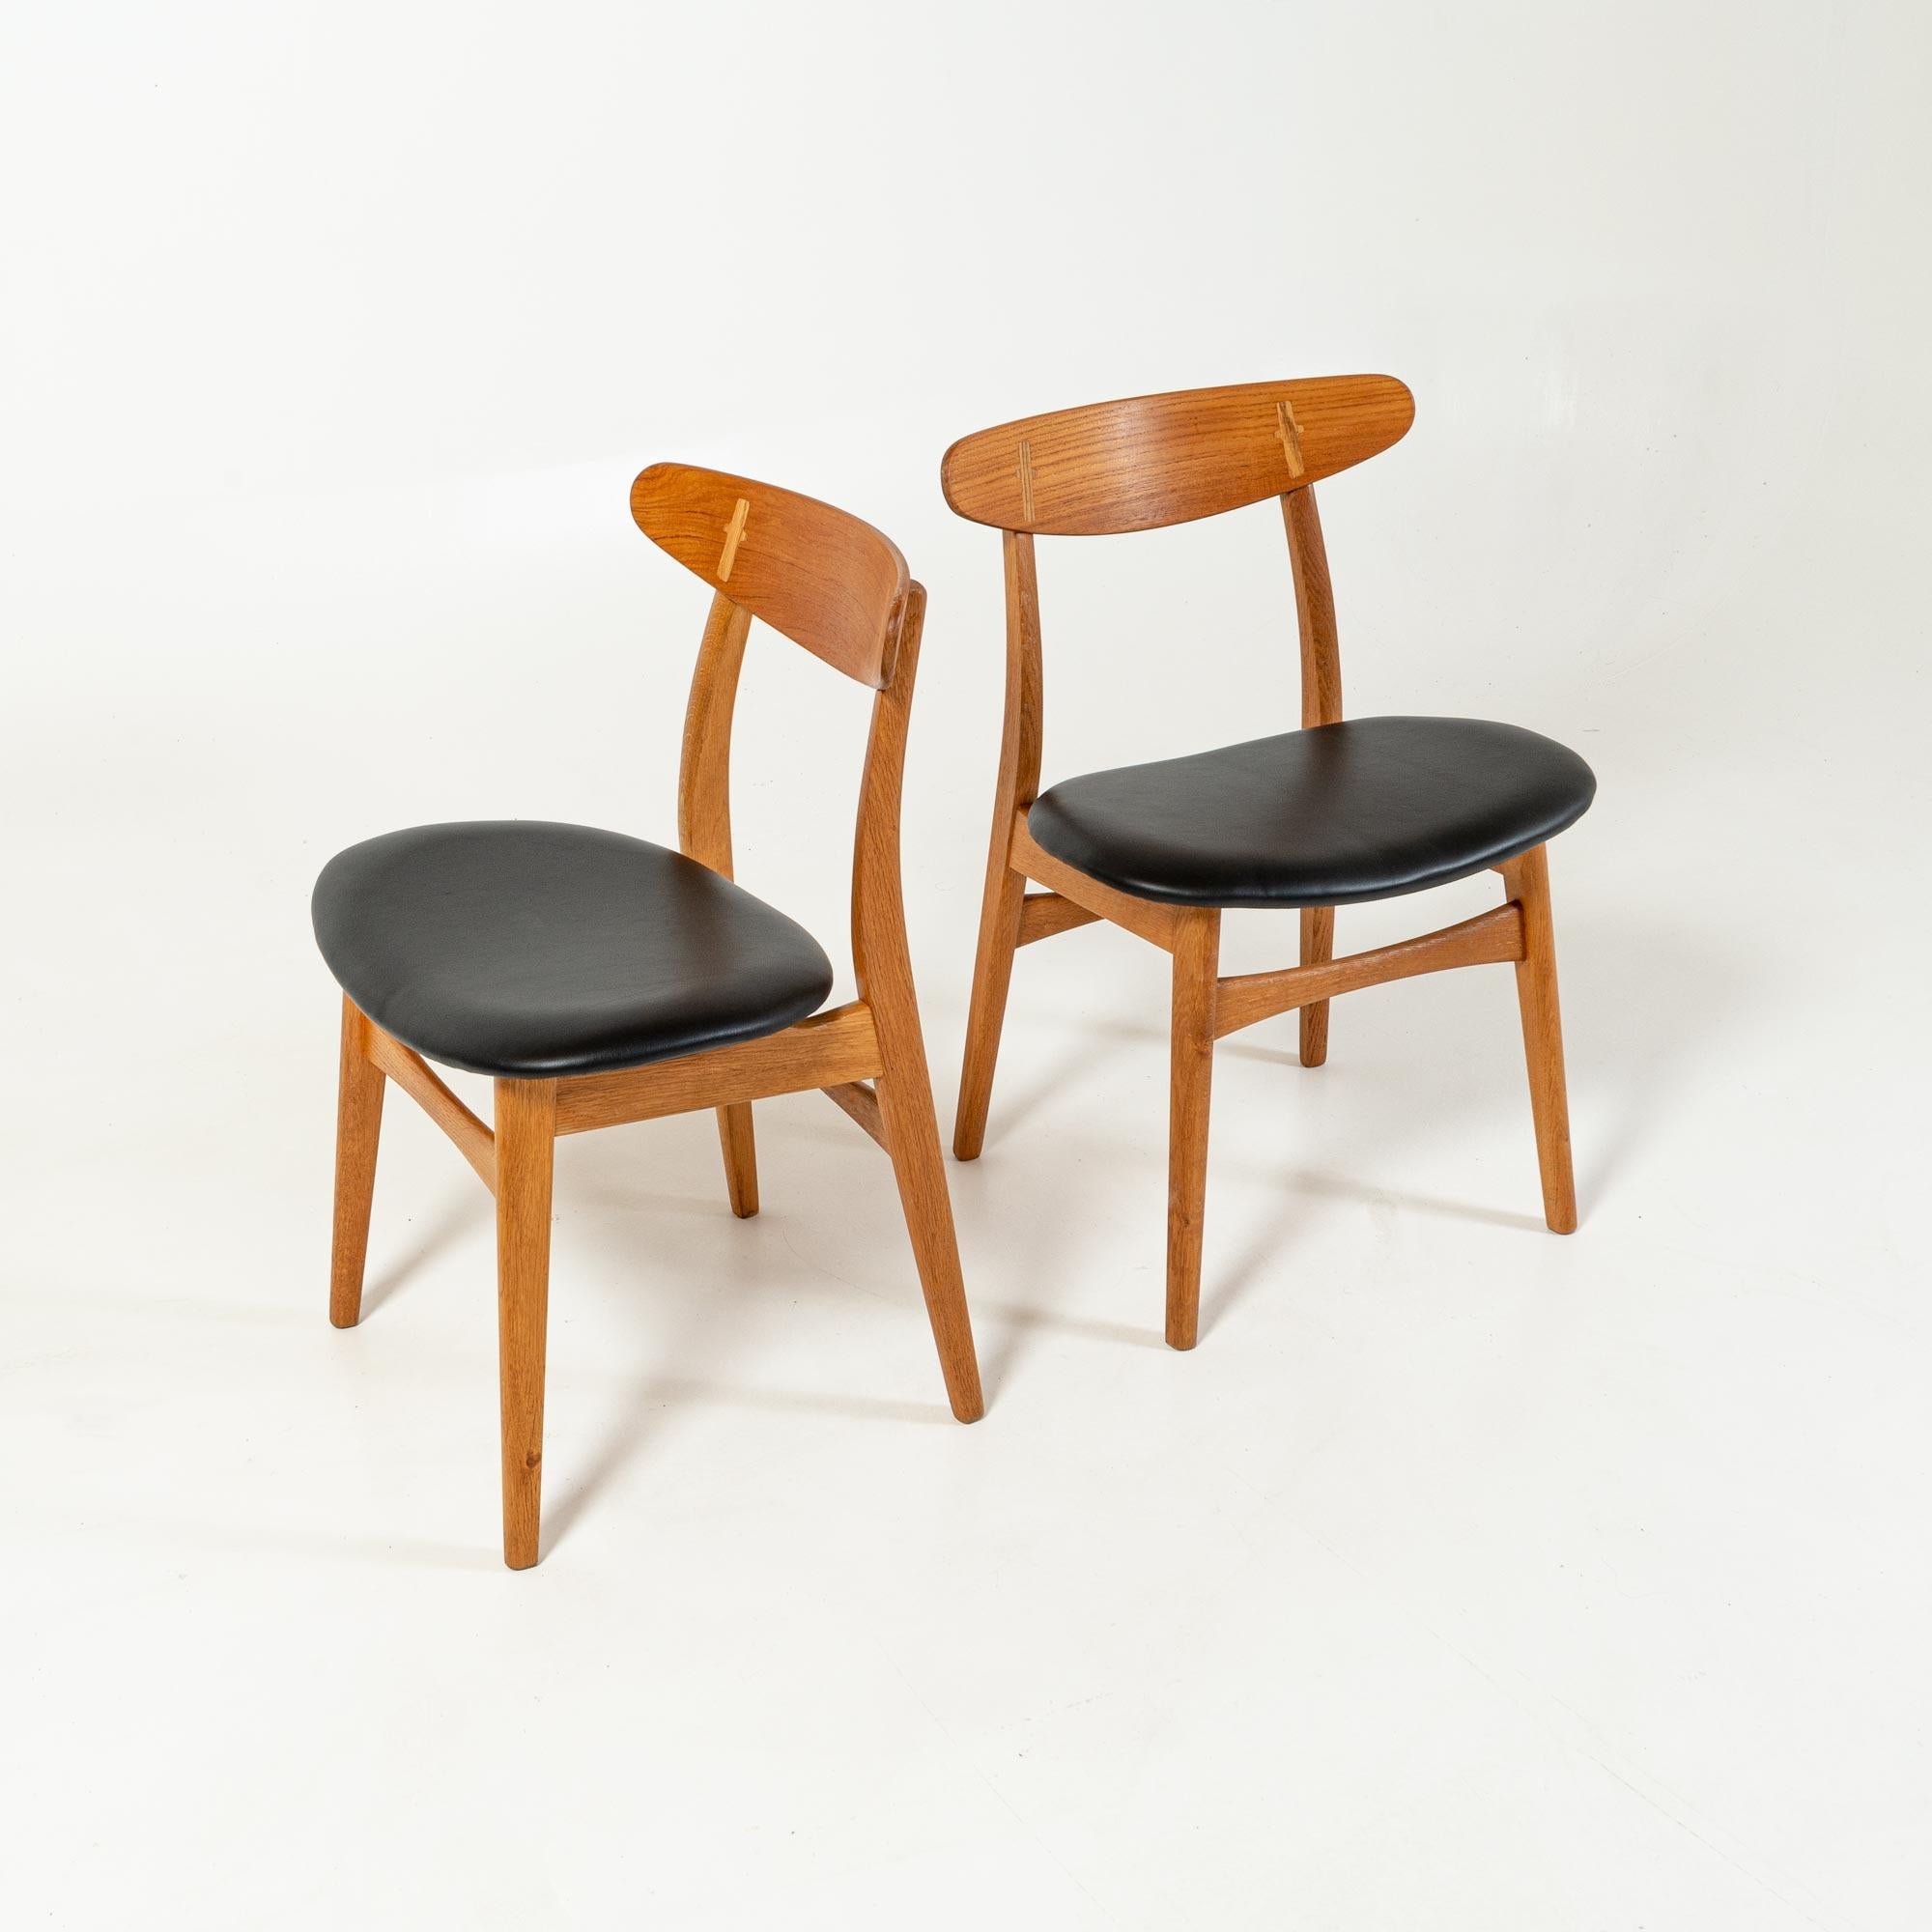 Danish CH30 Dining Chairs by Hans Wegner for Carl Hansen & Son in Oak, Teak and Leather